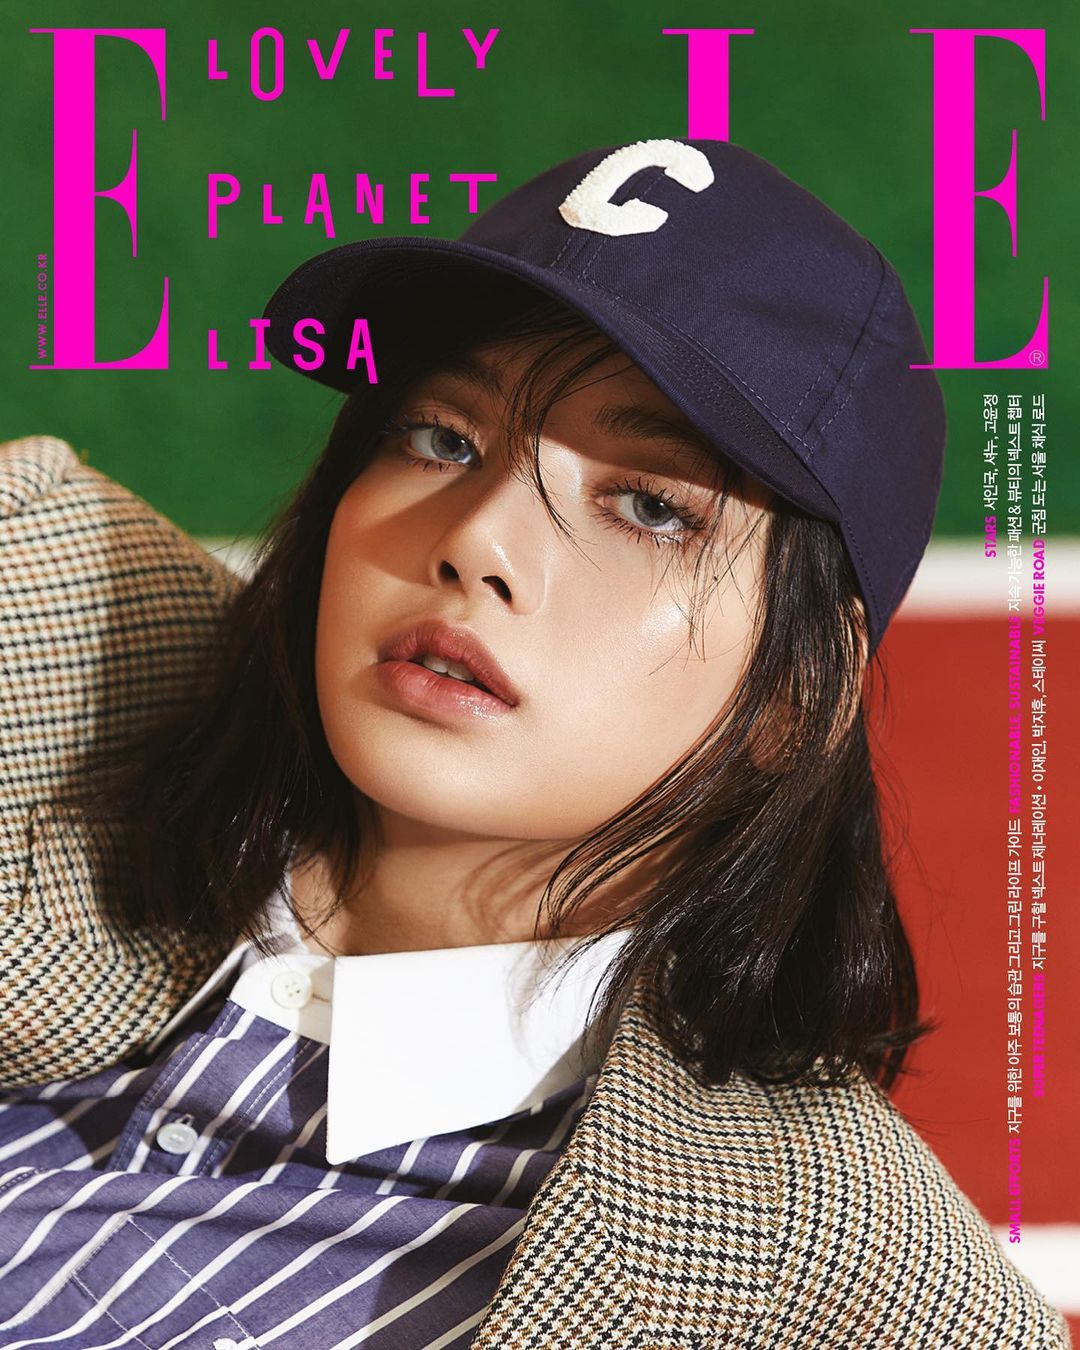 blackpink-lisa-conducts-new-pictorial-titled-lovely-planet-lisa-with-elle-magazine